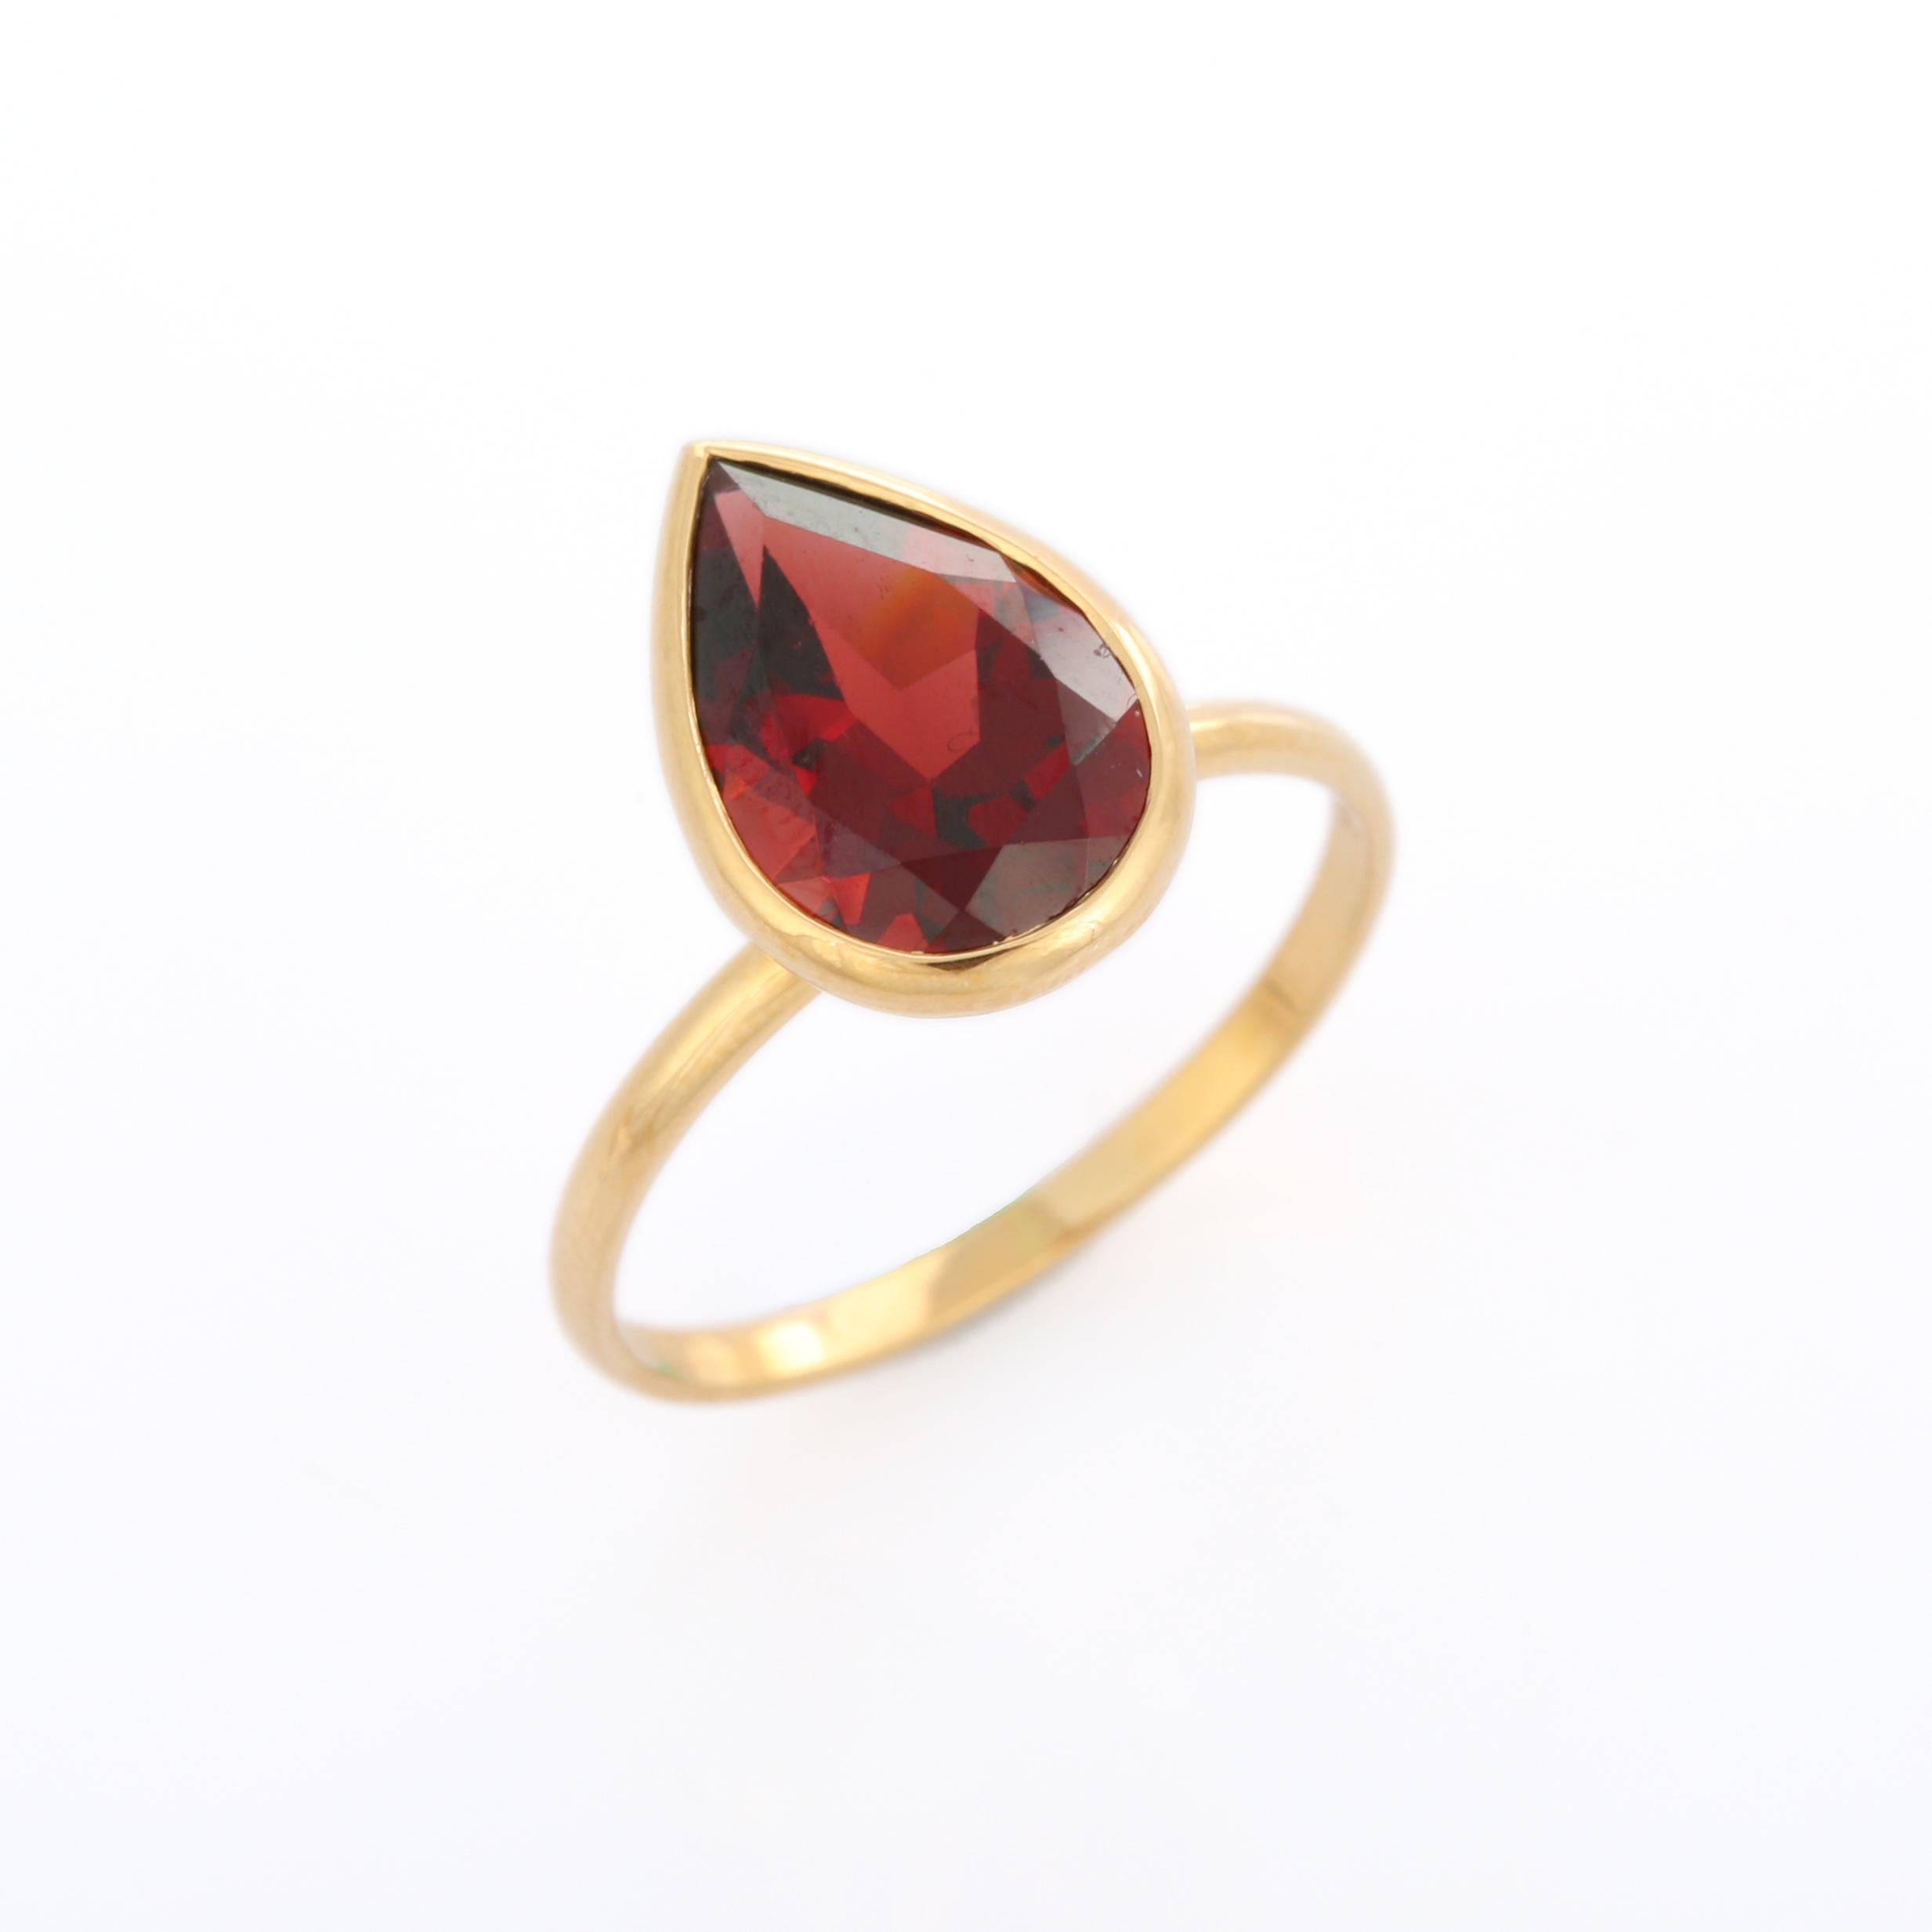 For Sale:  3.5 Carat Pear Cut Garnet Cocktail Ring in 18K Yellow Gold 5